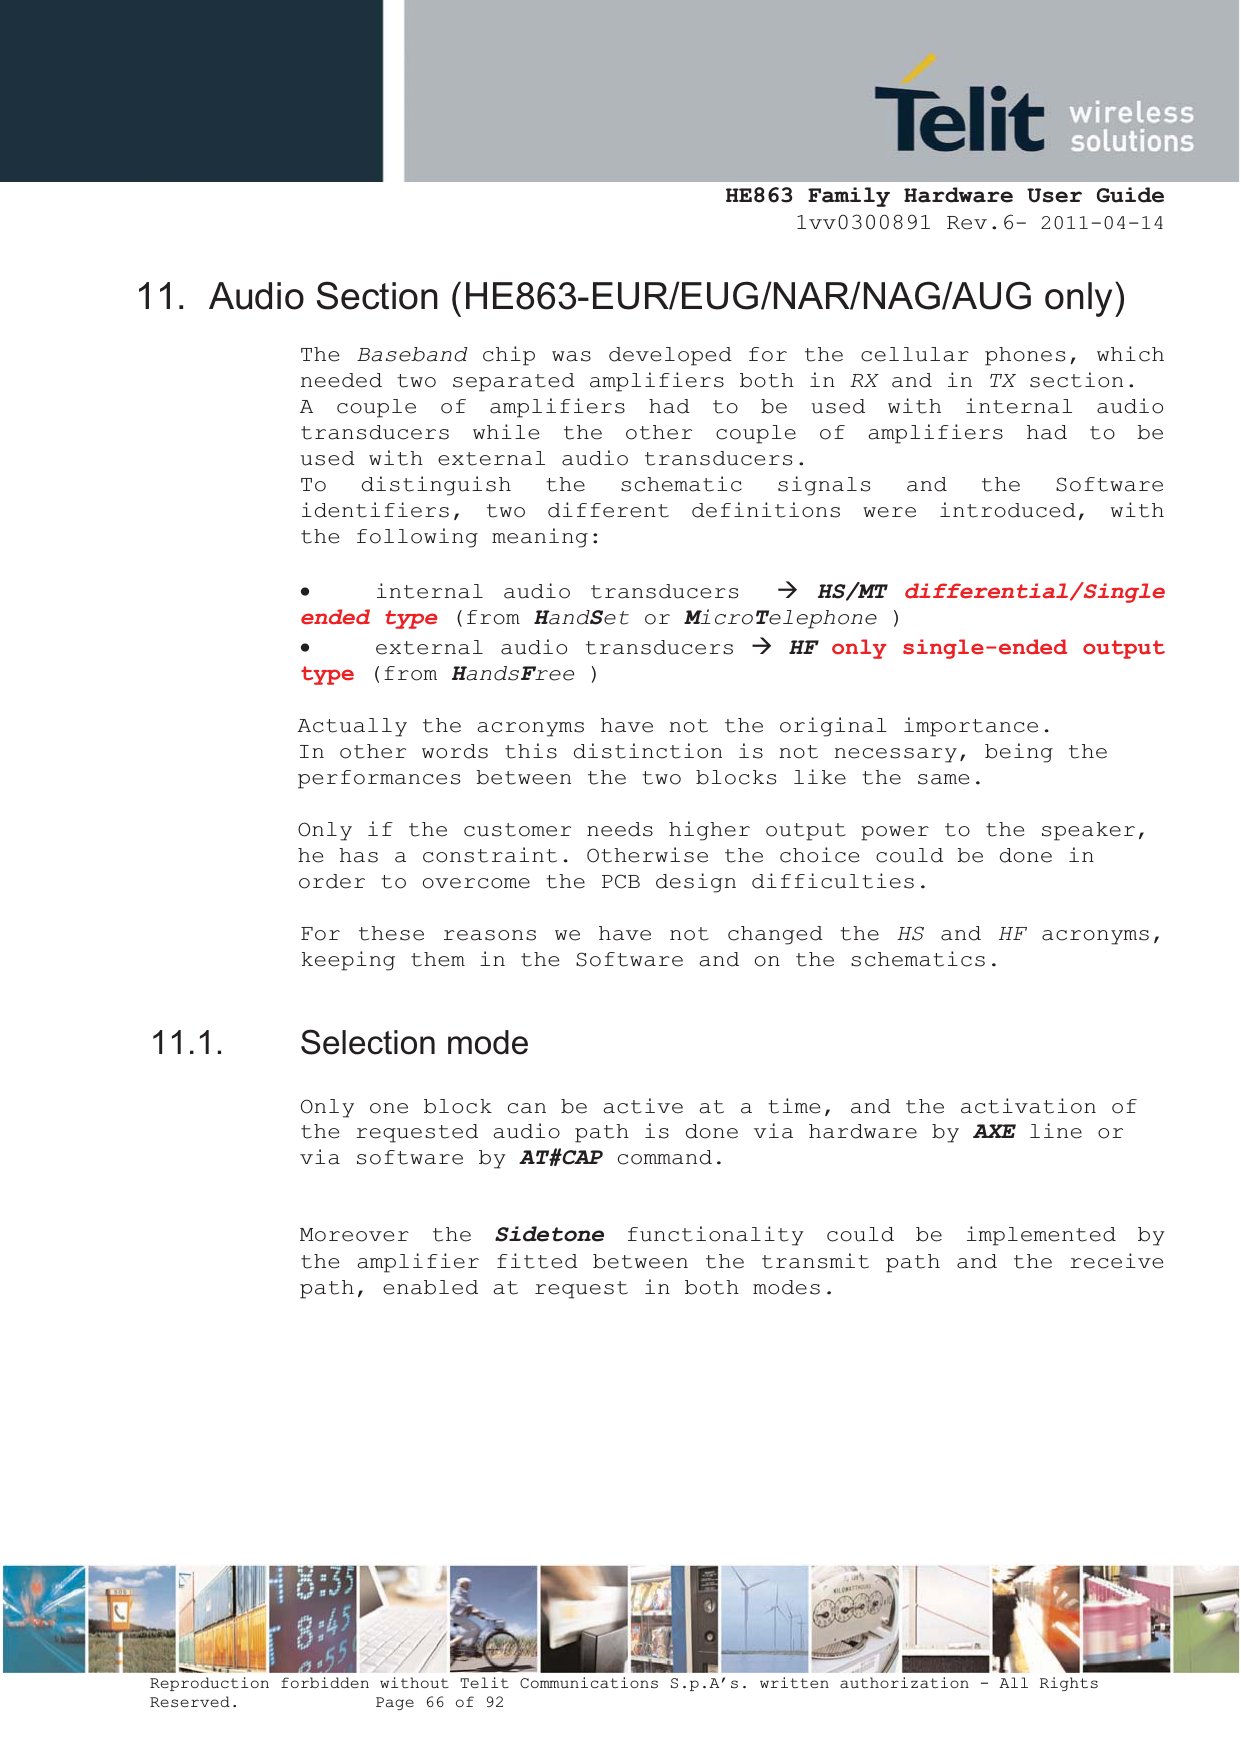  HE863 Family Hardware User Guide 1vv0300891 Rev.6- 2011-04-14    Reproduction forbidden without Telit Communications S.p.A’s. written authorization - All Rights Reserved.    Page 66 of 92  11.  Audio Section (HE863-EUR/EUG/NAR/NAG/AUG only) The Baseband chip was developed for the cellular phones, which needed two separated amplifiers both in RX and in TX section. A couple of amplifiers had to be used with internal audio transducers while the other couple of amplifiers had to be used with external audio transducers. To distinguish the schematic signals and the Software identifiers, two different definitions were introduced, with the following meaning:  x internal audio transducers  Æ HS/MT differential/Single ended type (from HandSet or MicroTelephone ) x external audio transducers Æ HF only single-ended output type (from HandsFree )     Actually the acronyms have not the original importance.  In other words this distinction is not necessary, being the performances between the two blocks like the same.  Only if the customer needs higher output power to the speaker, he has a constraint. Otherwise the choice could be done in order to overcome the PCB design difficulties.   For these reasons we have not changed the HS and HF acronyms, keeping them in the Software and on the schematics.   11.1. Selection mode Only one block can be active at a time, and the activation of the requested audio path is done via hardware by AXE line or via software by AT#CAP command.  Moreover the Sidetone functionality could be implemented by the amplifier fitted between the transmit path and the receive path, enabled at request in both modes.       